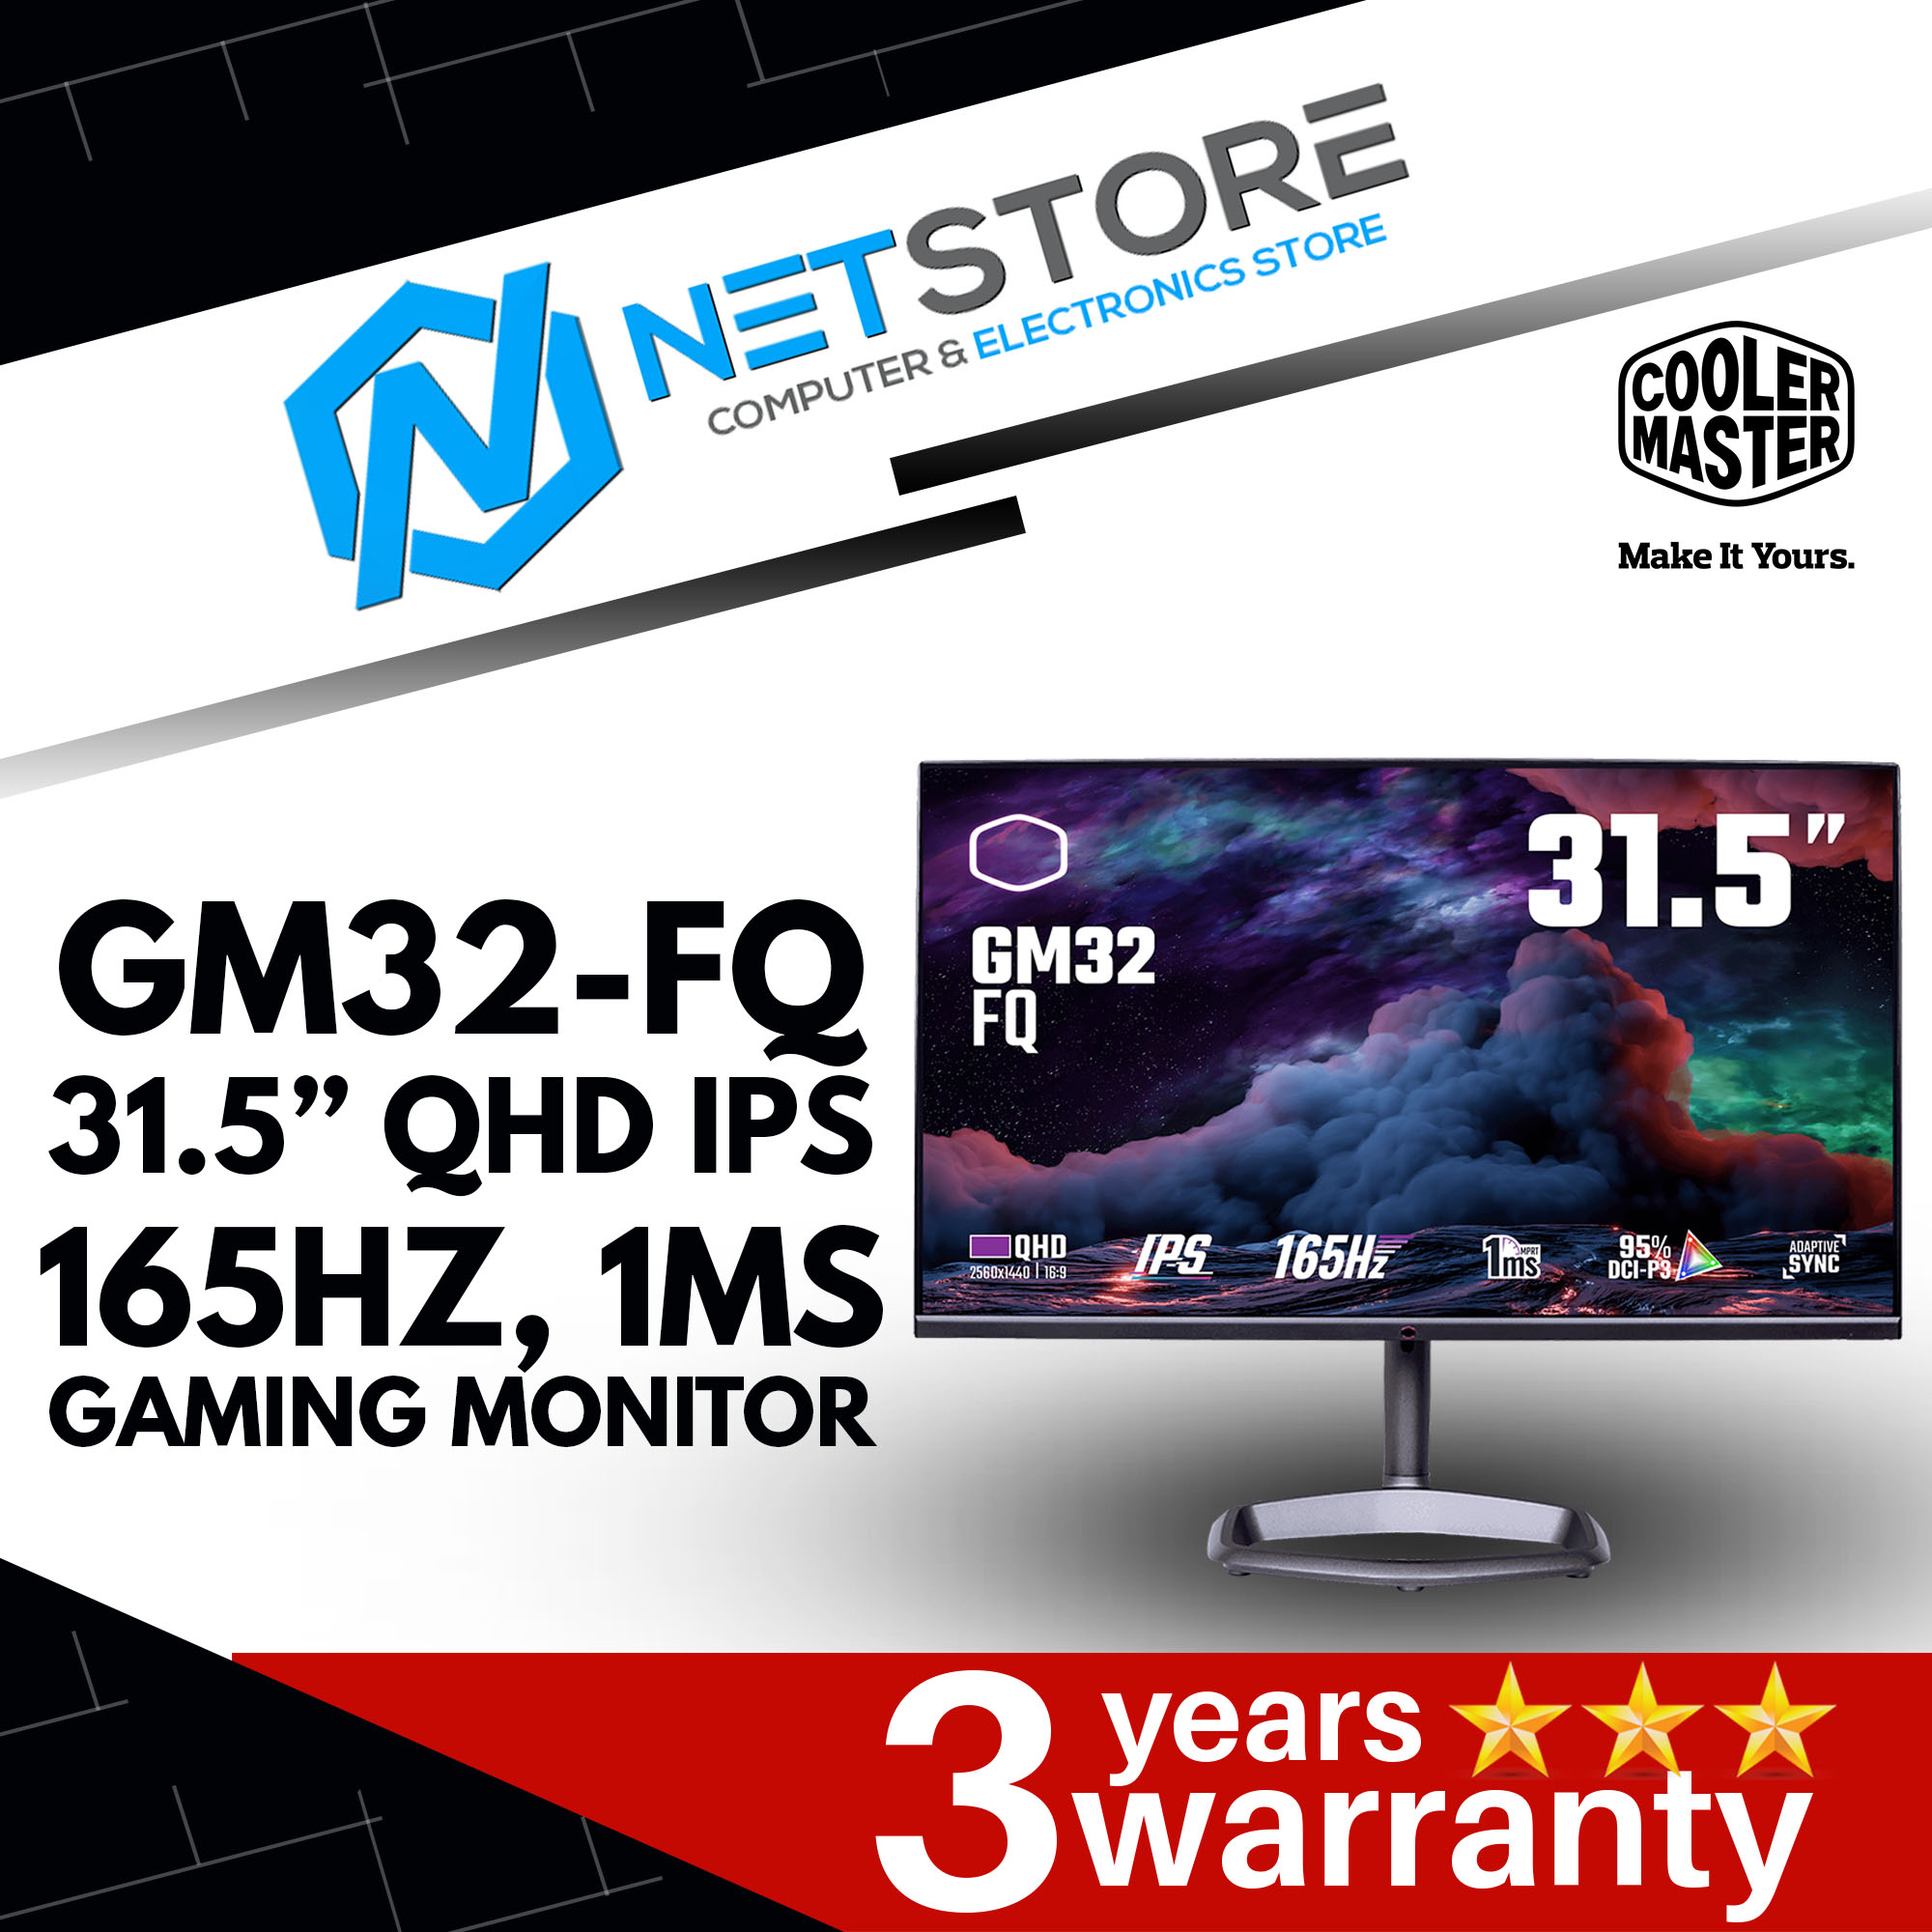 COOLER MASTER GM32-FQ 31.5&#8221; QHD IPS 165HZ, 1MS GAMING MONITOR